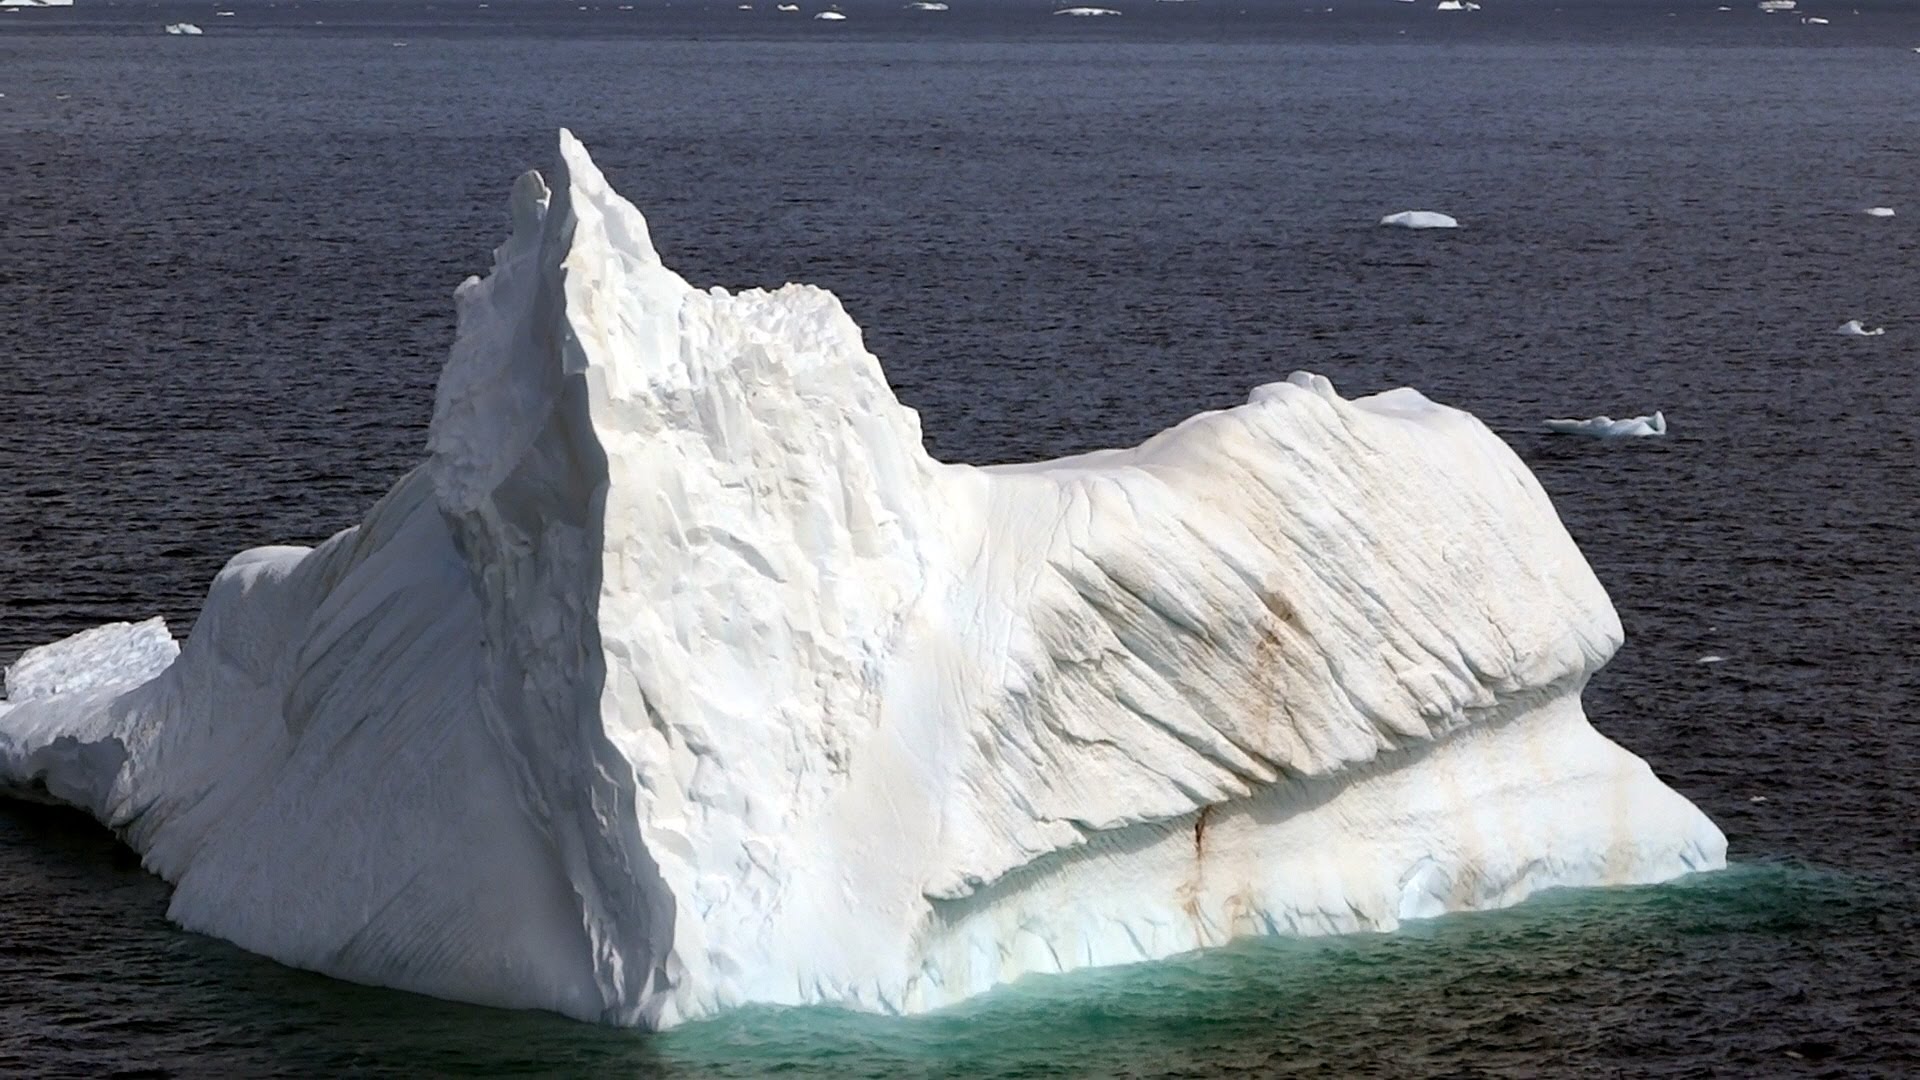 Icebergs & Glaciers Seen From Our Cruise Ship Balcony - YouTube